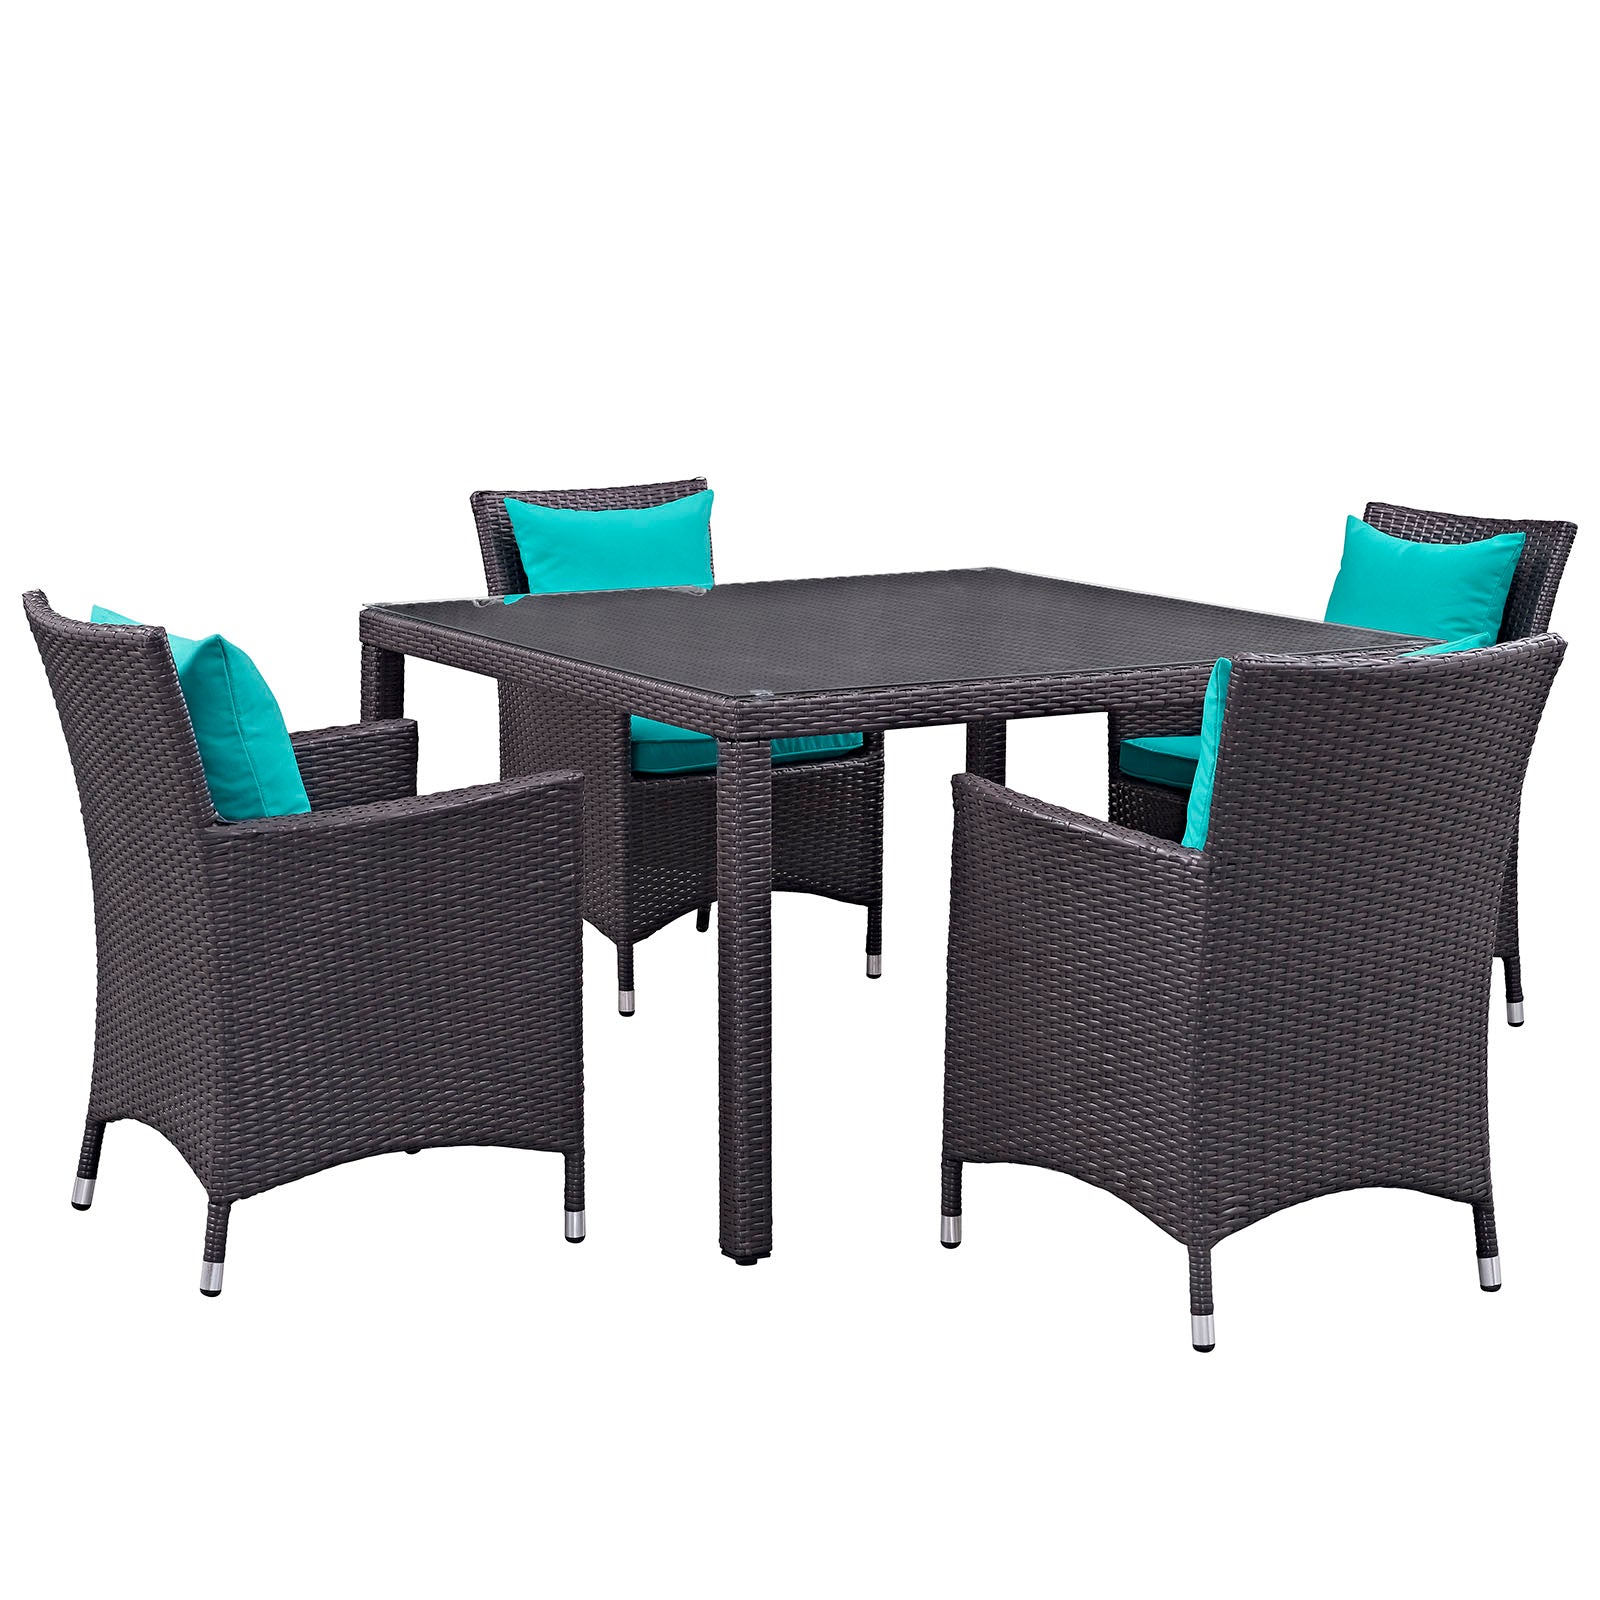 Modway Outdoor Dining Sets - Convene 5 Piece Outdoor Patio Dining Set Espresso Turquoise